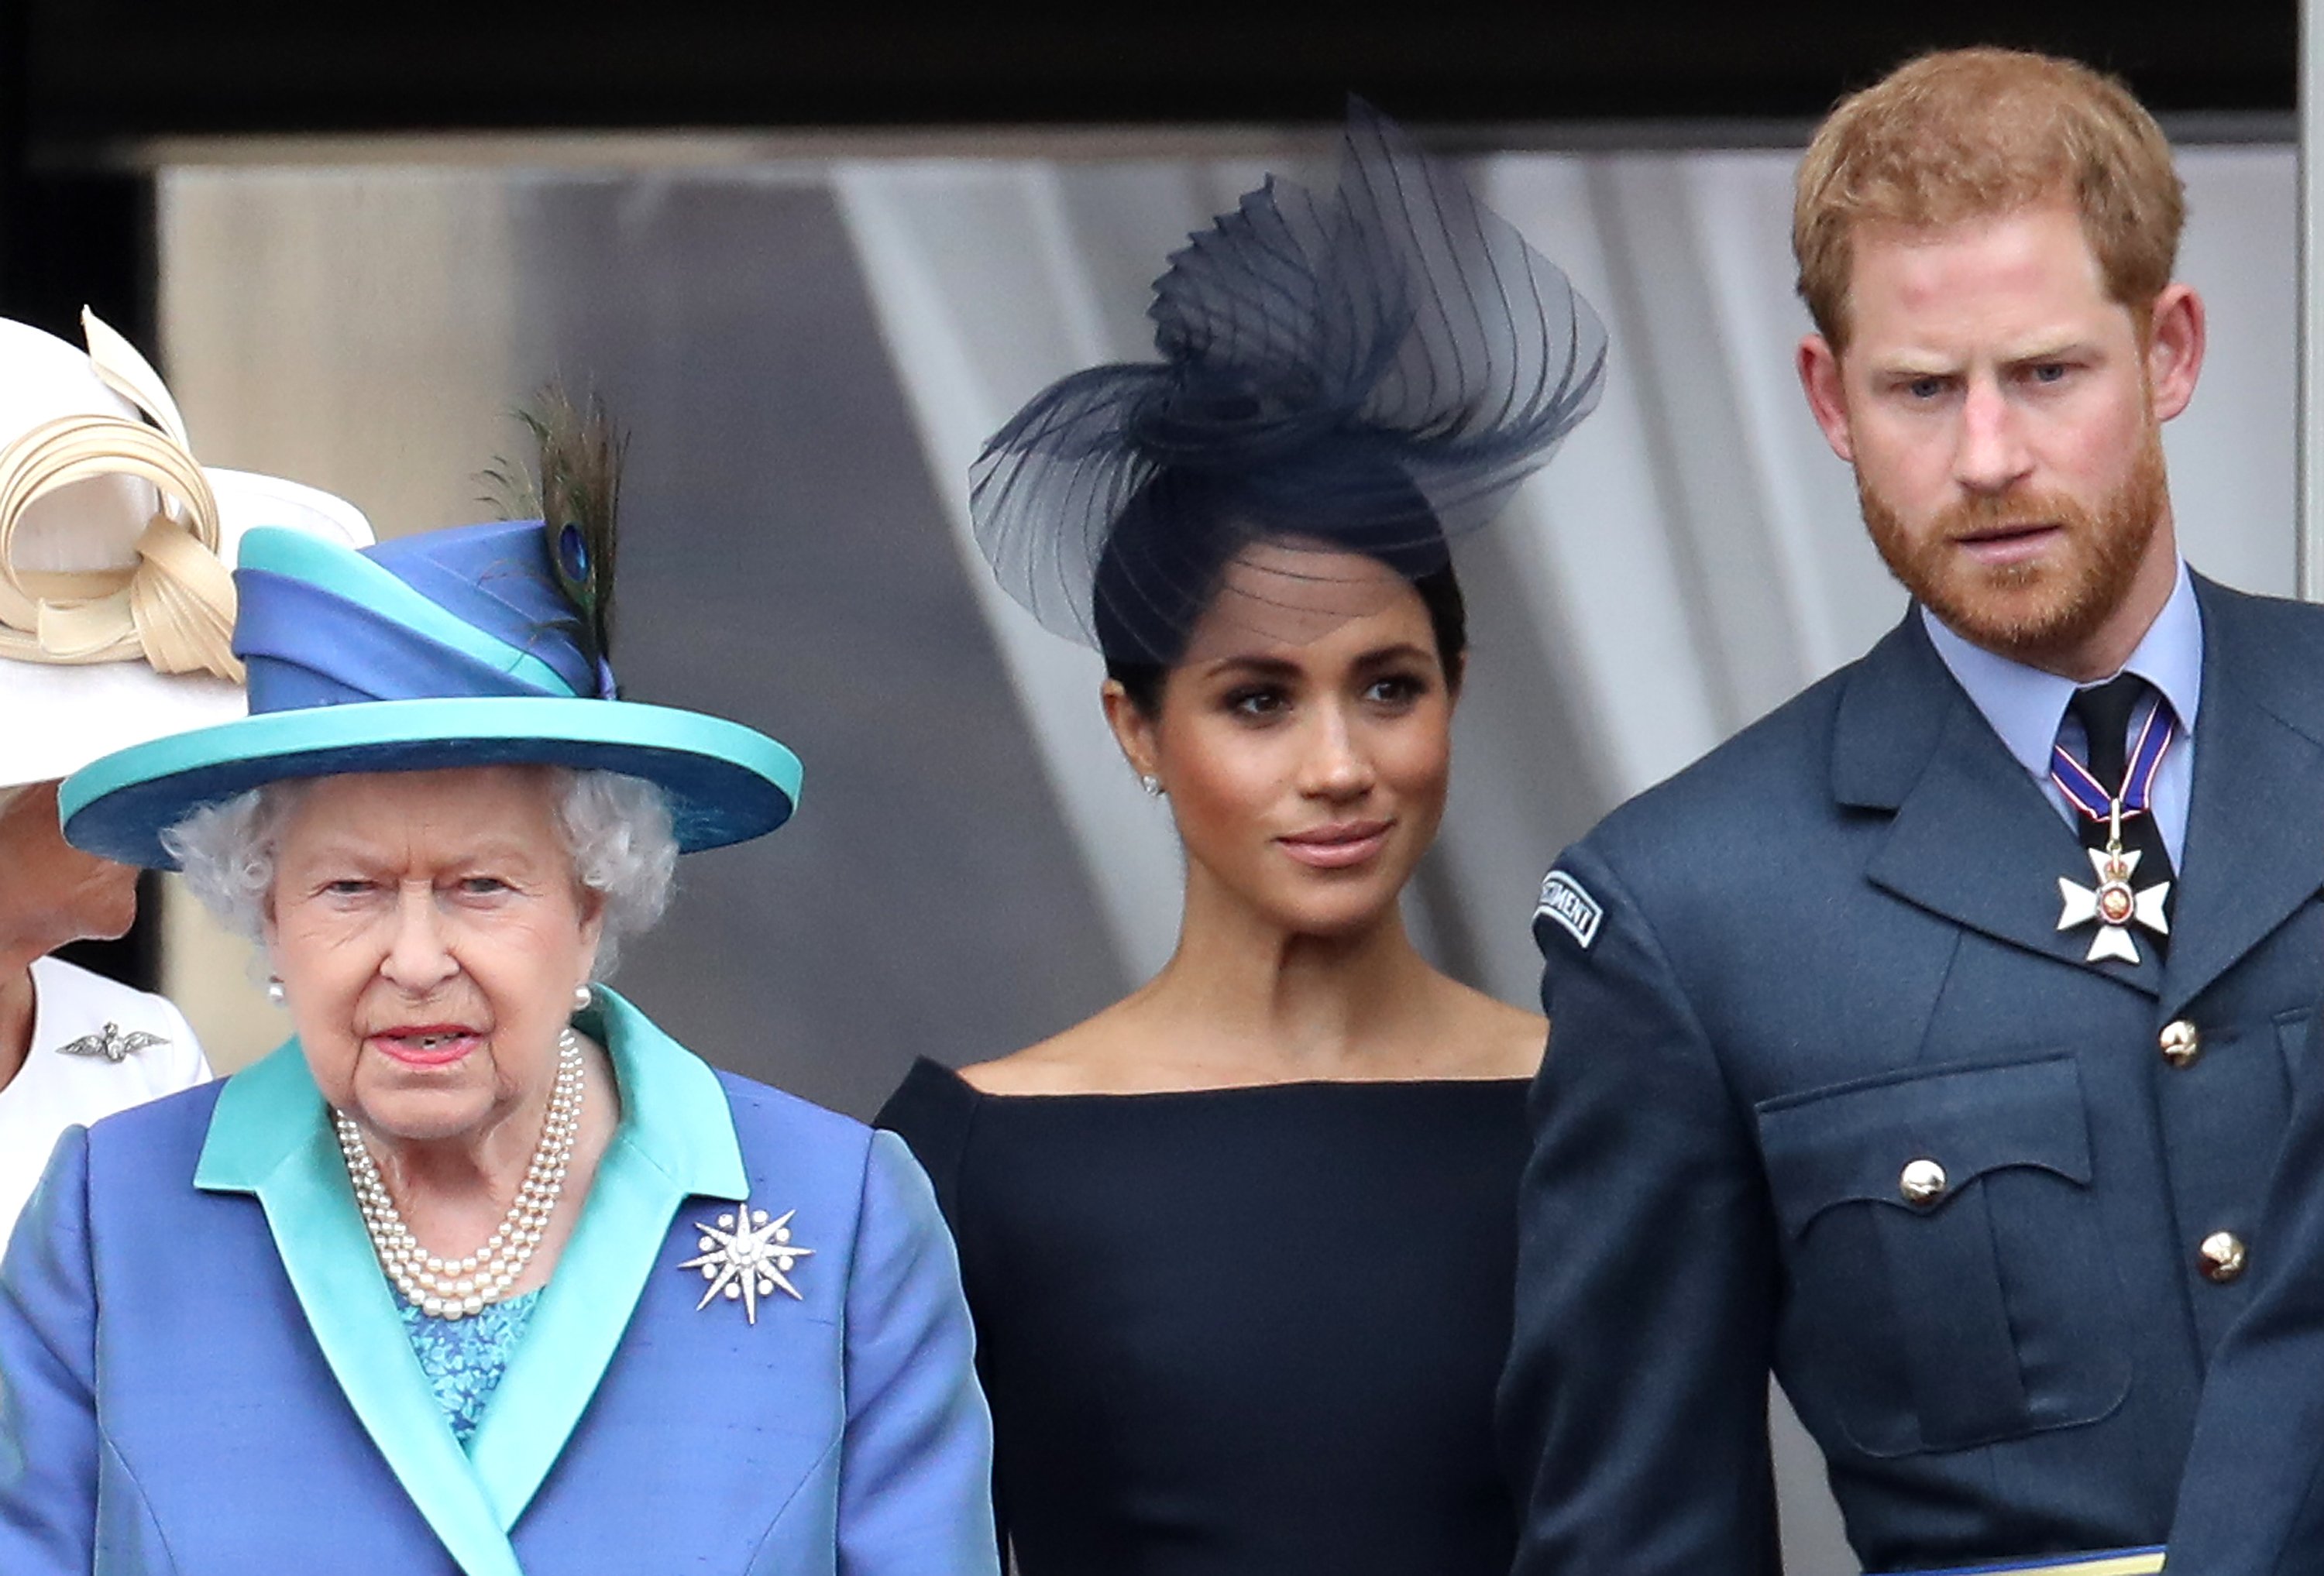 Queen Elizabeth II, Prince Harry and Meghan Markle in London 2018. | Source: Getty Images